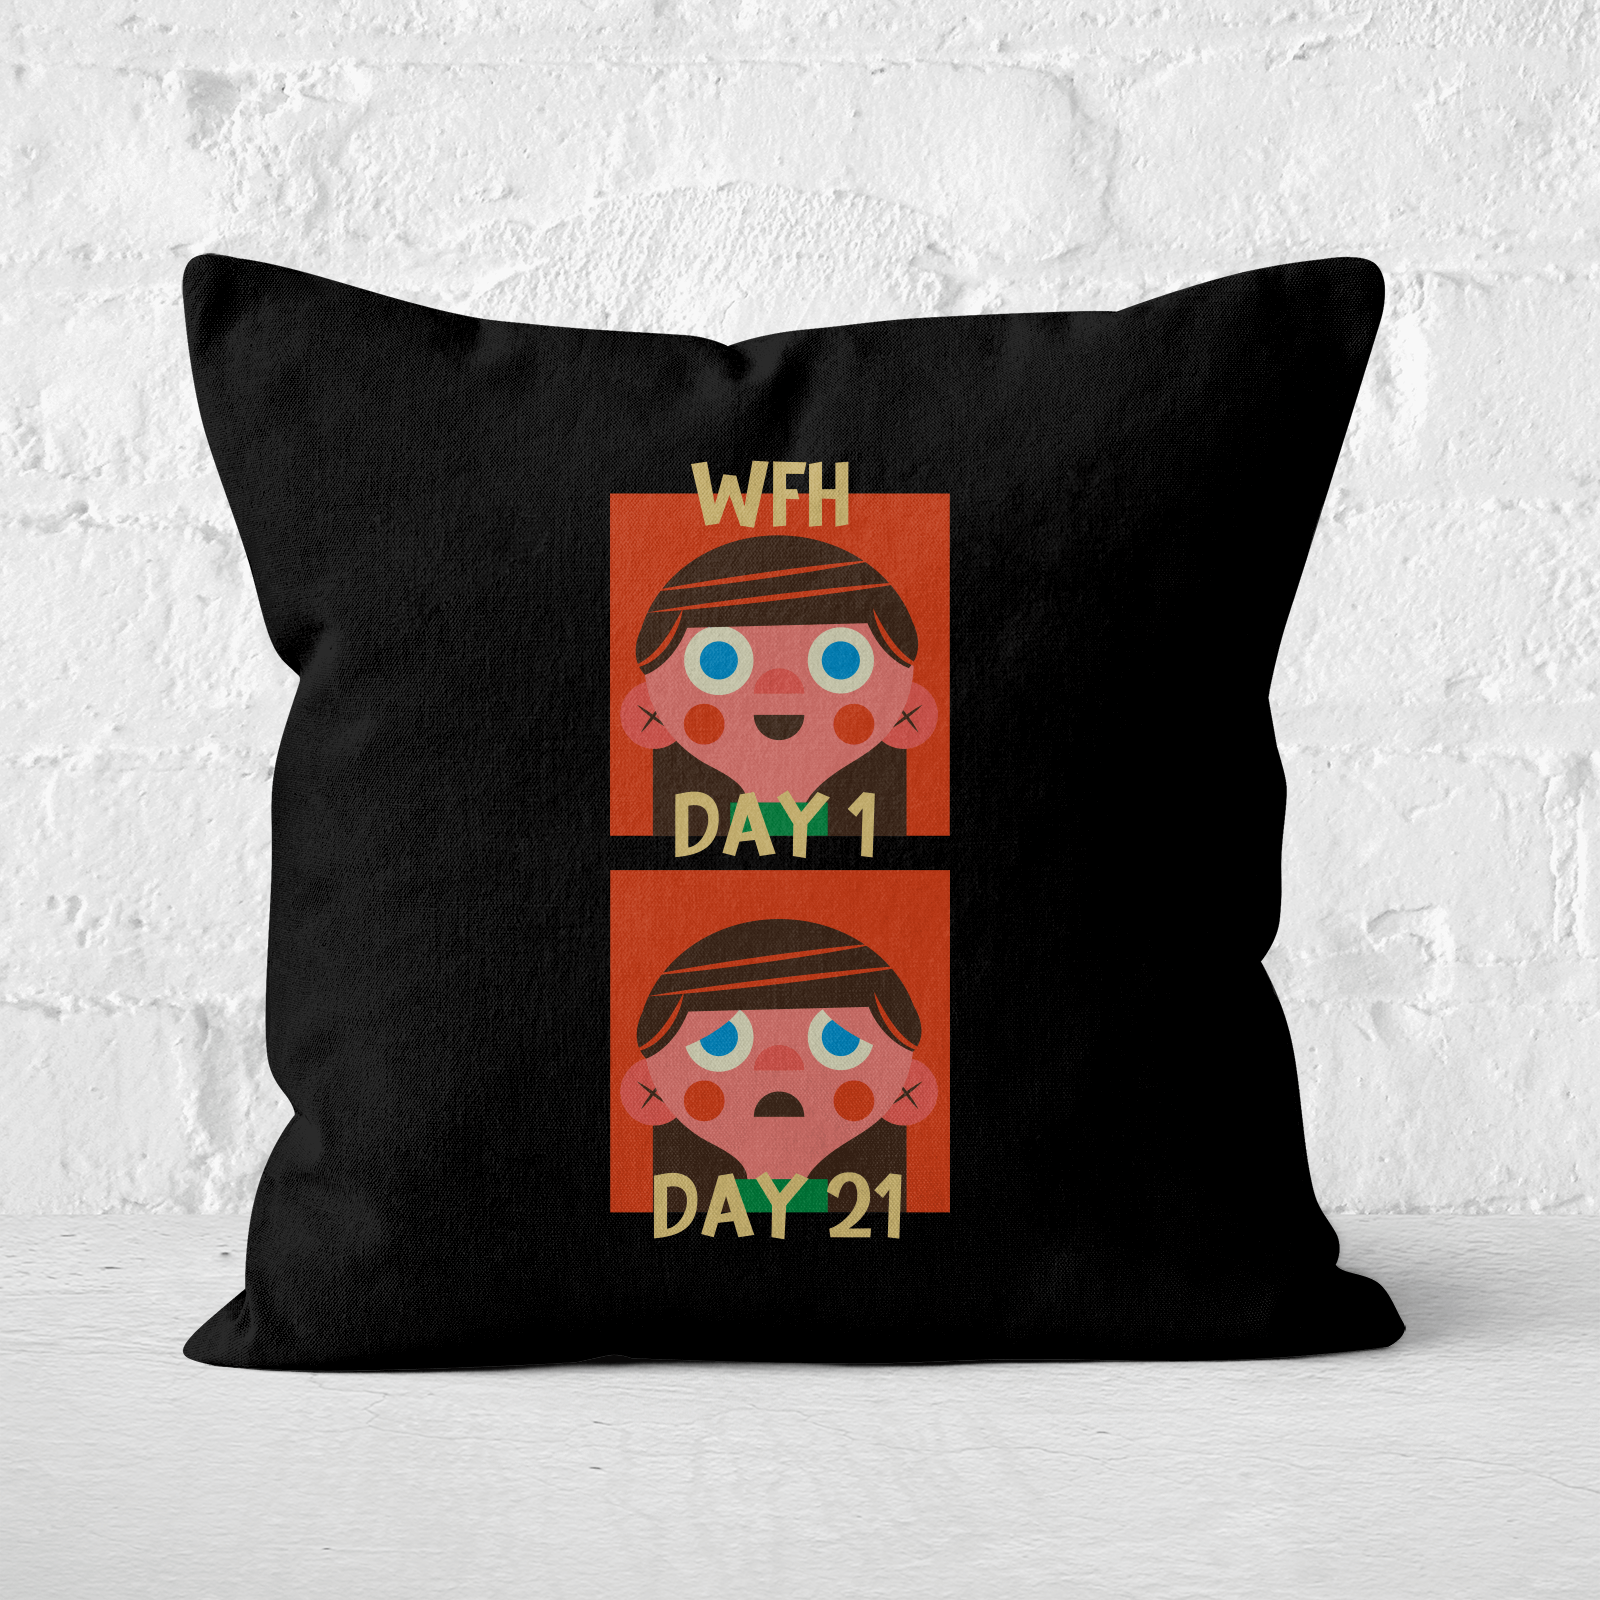 How Many Days? Square Cushion - 60x60cm - Soft Touch